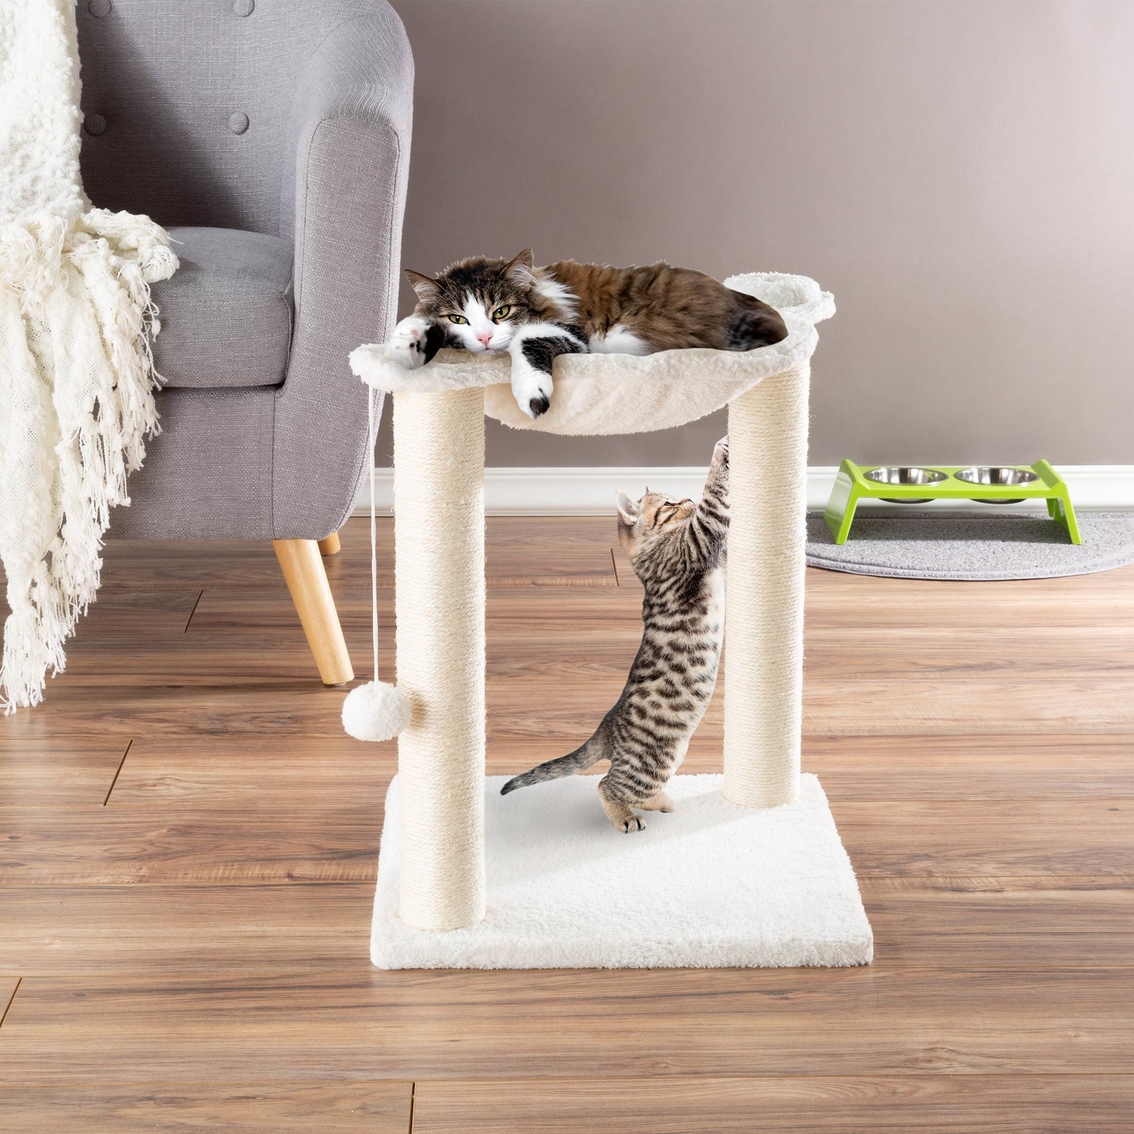 Petmaker Cat Tree and Scratcher Hammock Style Lounging Bed - Image 2 of 7